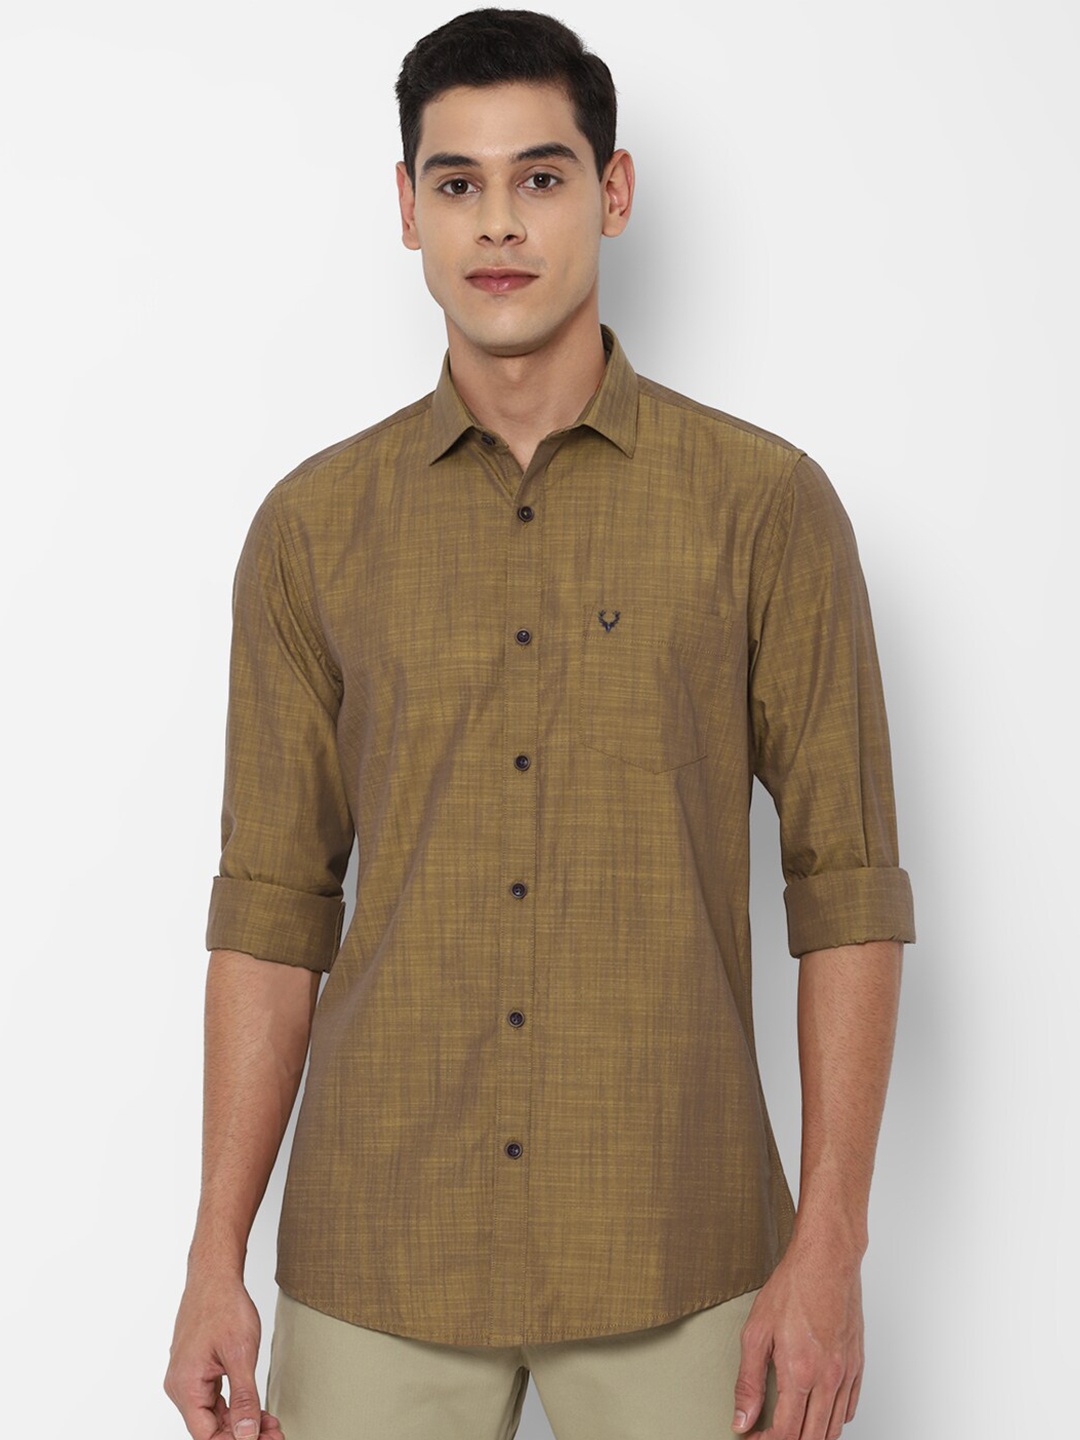 Allen Solly Mens Casual Shirts